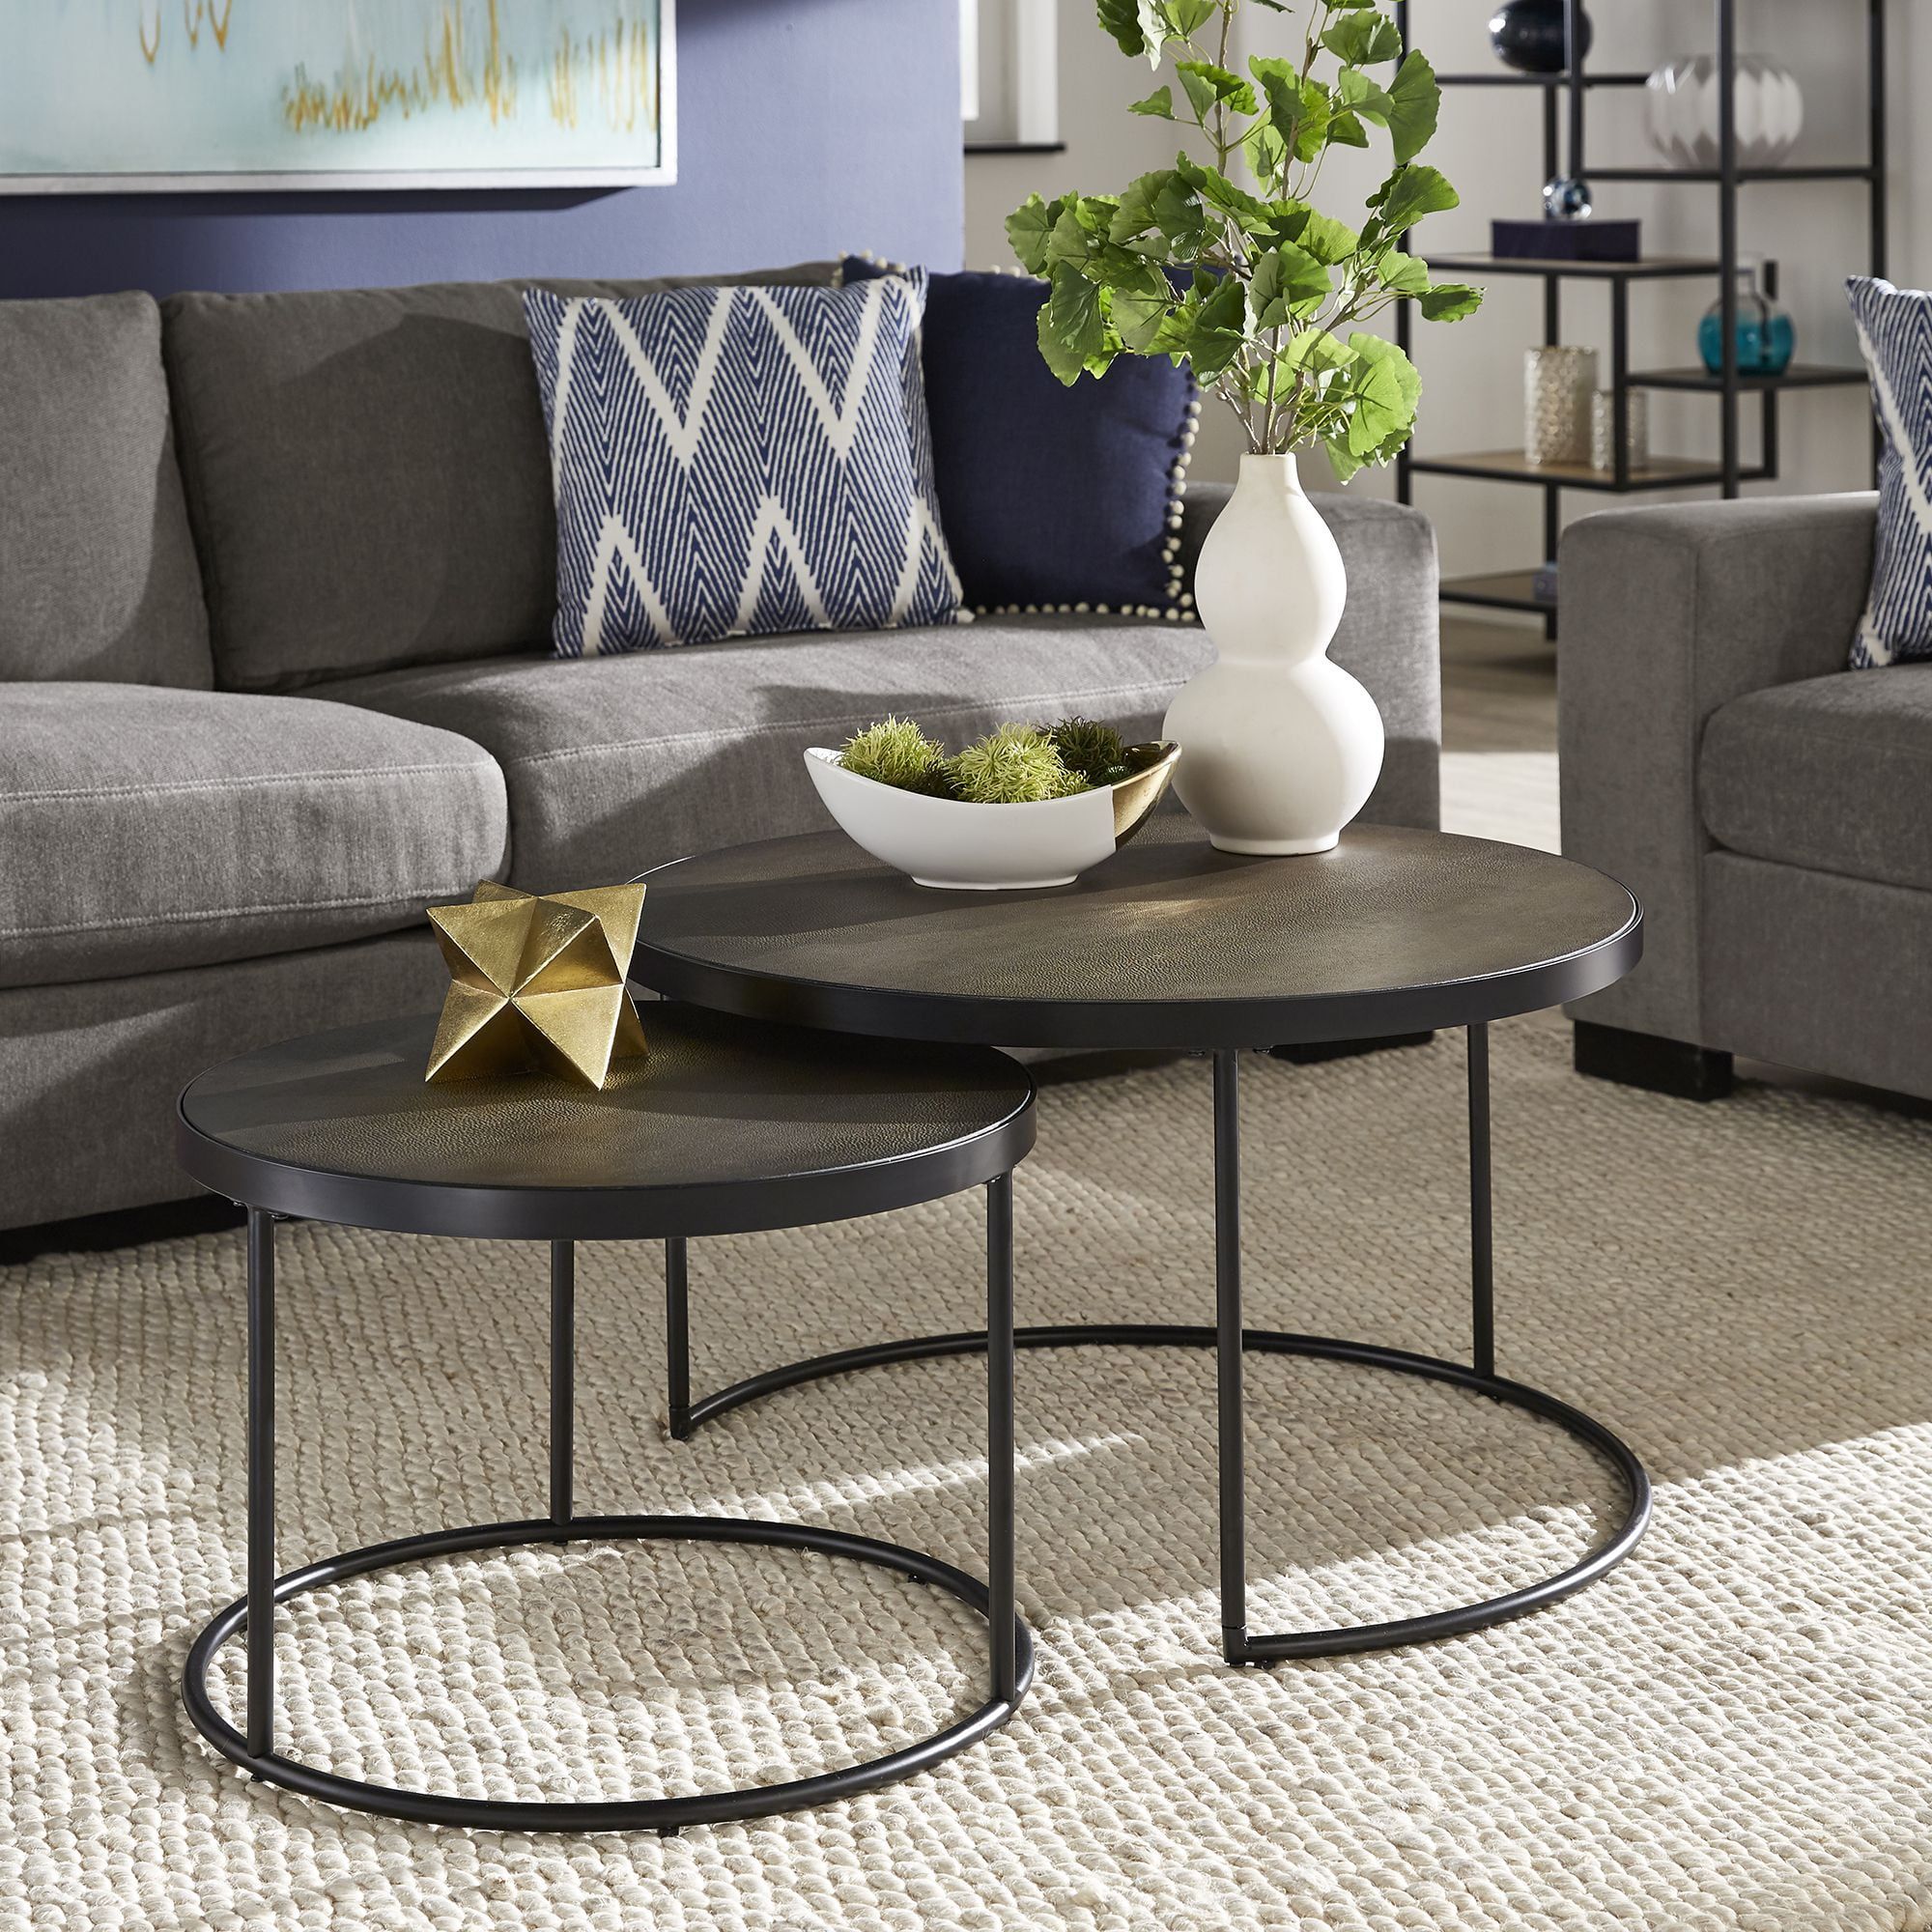 Weston Home Cambridge Black Finish Round Nesting Coffee Tables, Set Of With Full Black Round Coffee Tables (View 4 of 20)